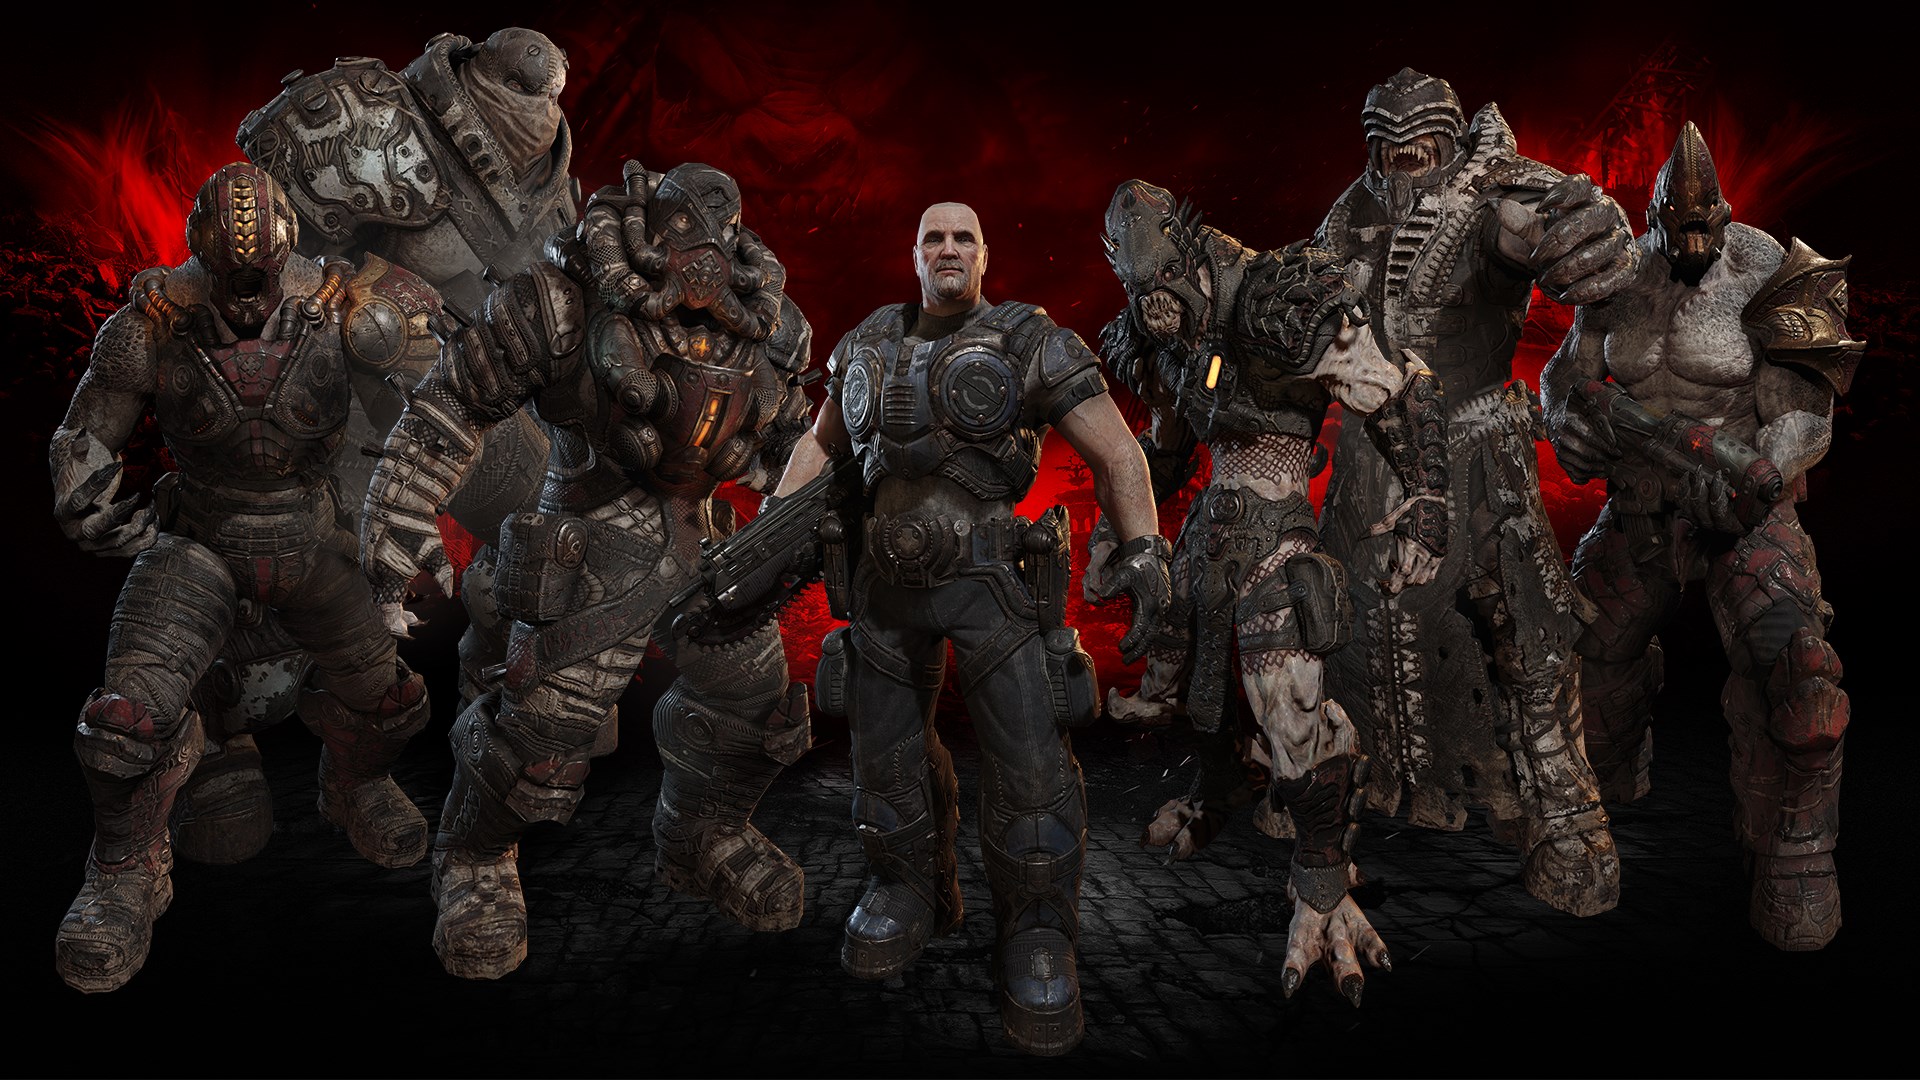 Gears of War Ultimate Edition review